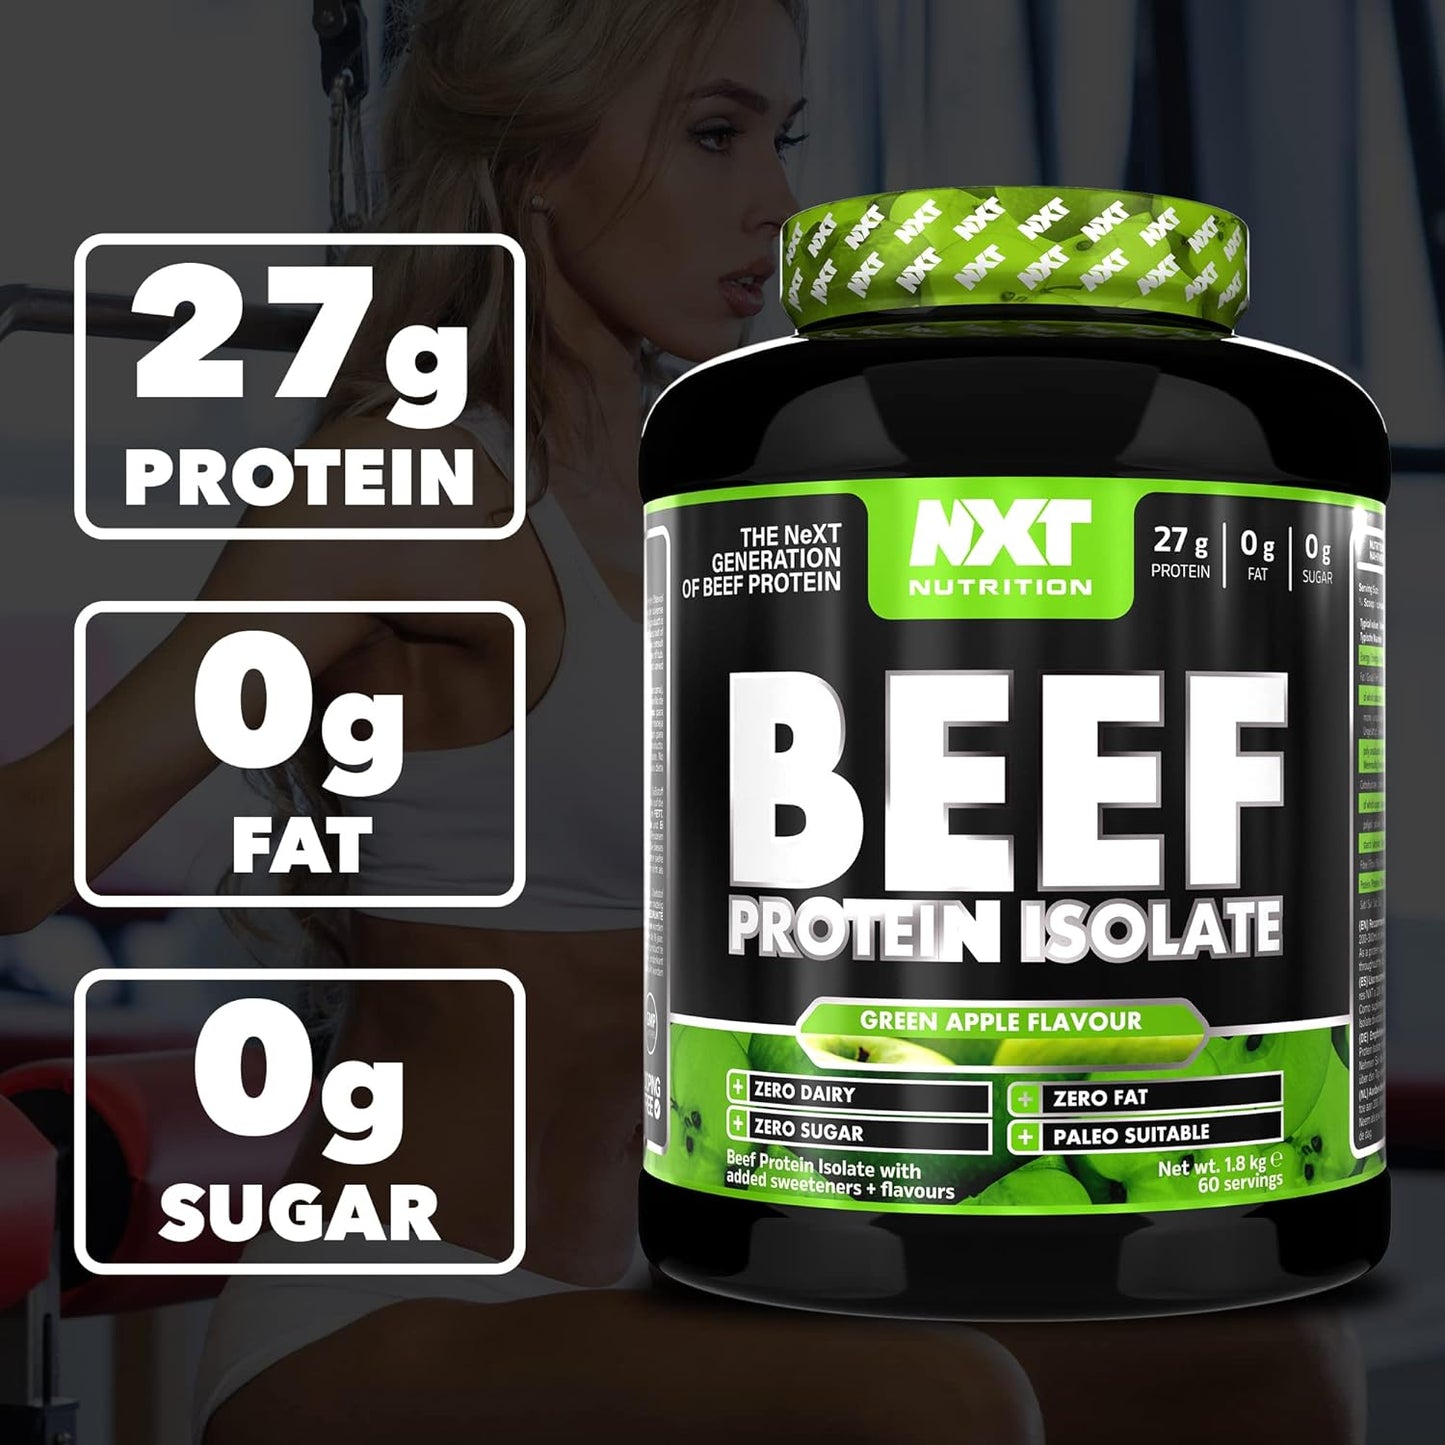 Beef Protein Isolate Powder - Protein Powder High in Natural Amino Acids - Paleo, Keto Friendly - Dairy and Gluten Free - Muscle Recovery | 1.8Kg (Apple)